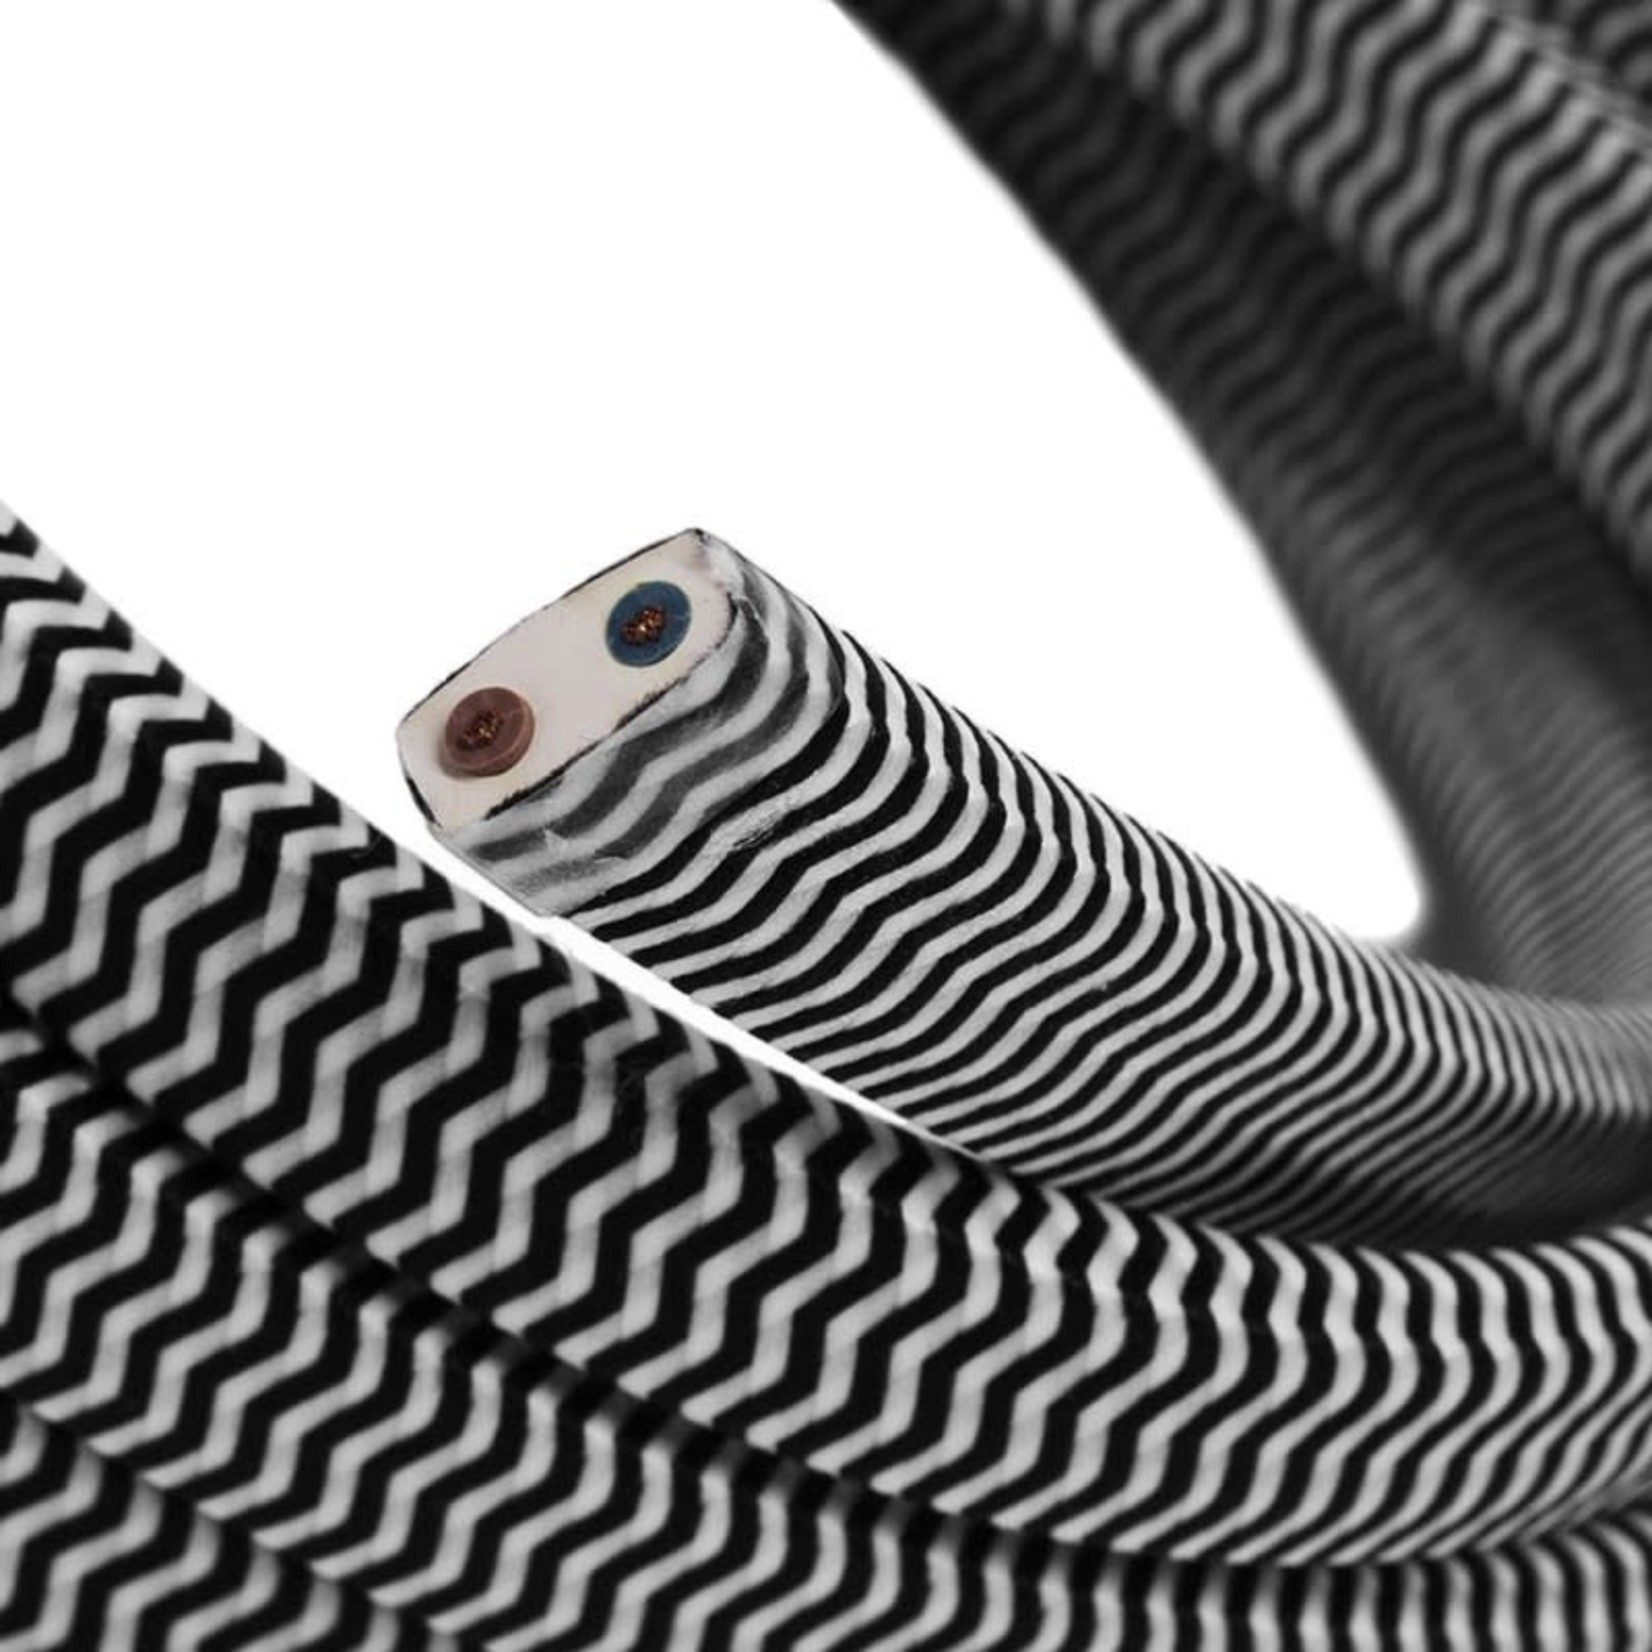 CCIT PER METRE - Electric cable for String Lights, covered by Rayon fabric ZigZag White-Black CZ04